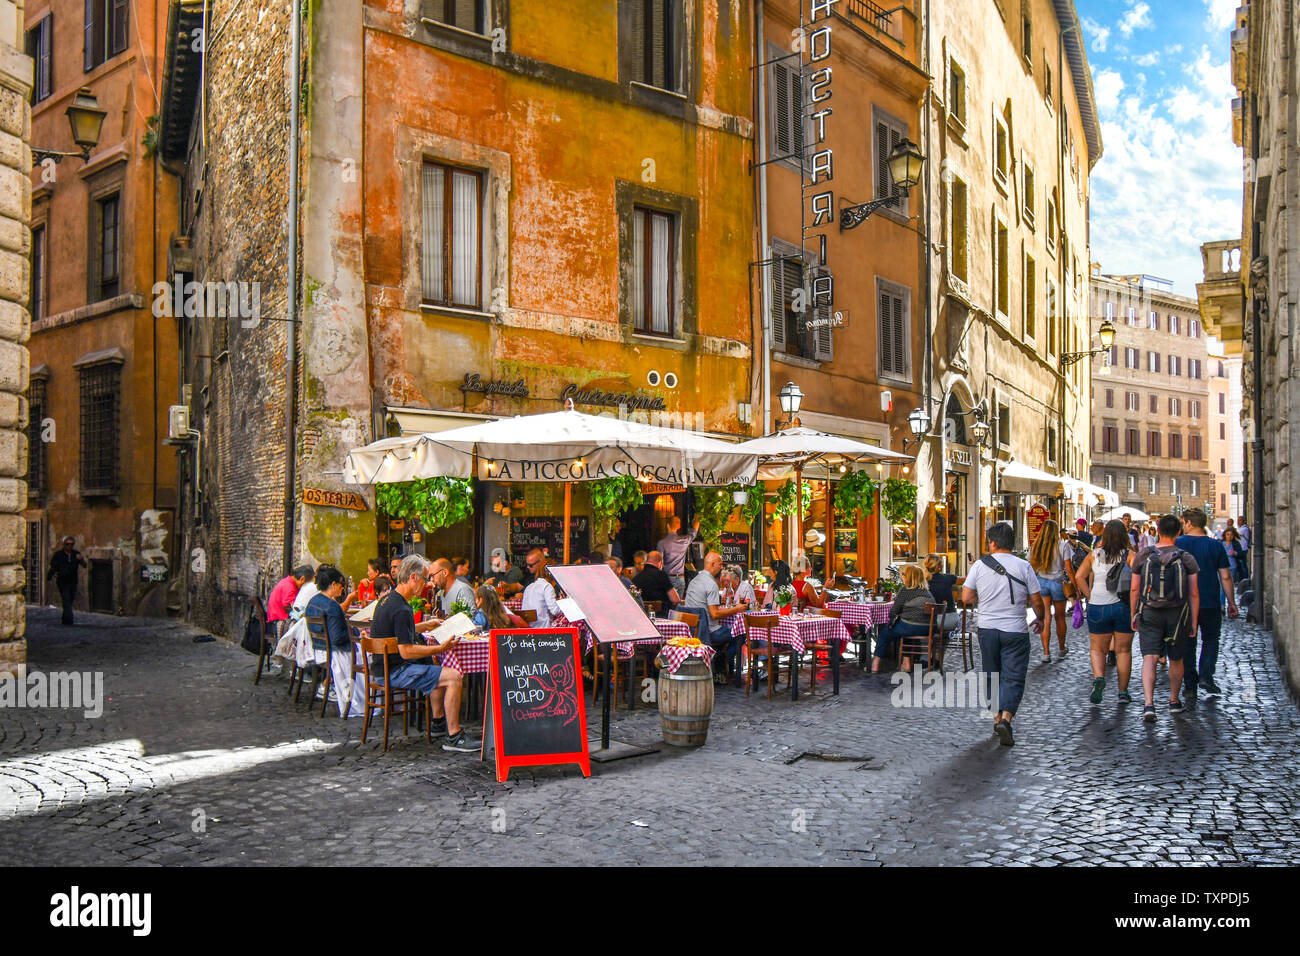 Tourists enjoy lunch on a summer day at an Italian sidewalk cafe restaurant in an alley near the historic center of Rome, Italy. Stock Photo